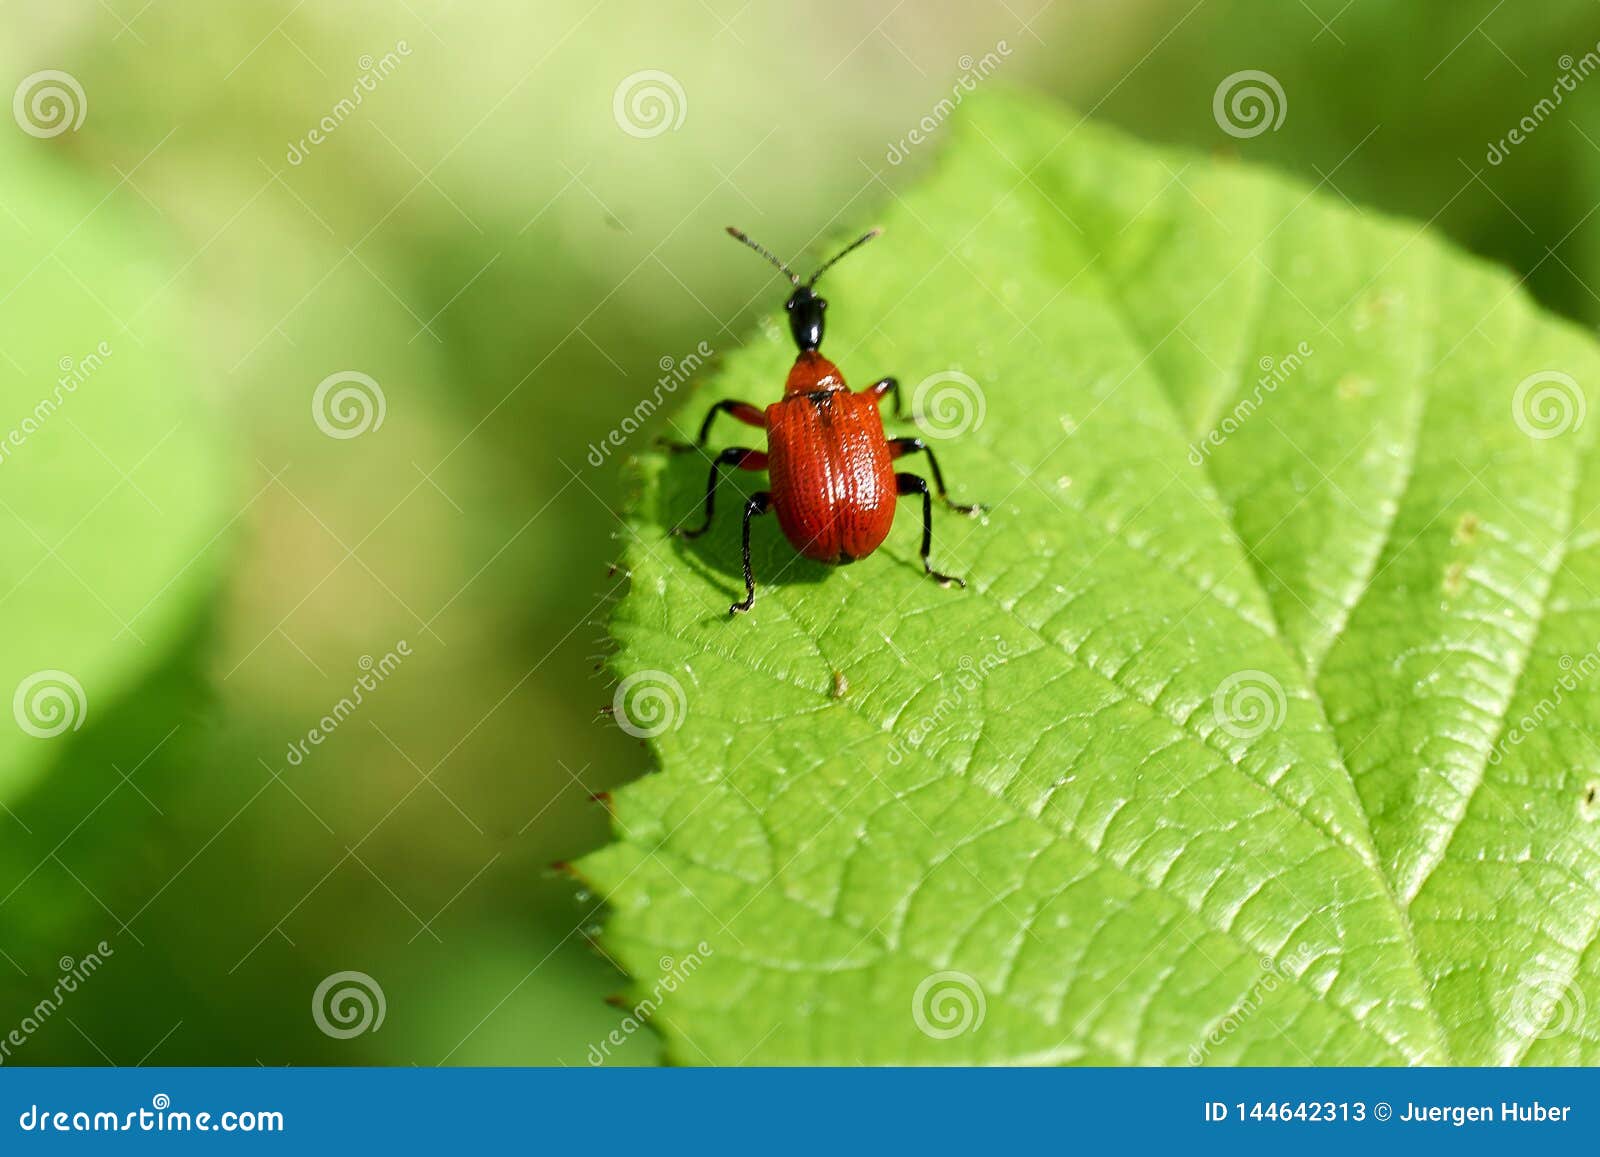 Little Red Bugs In Field On A Leaf Stock Image Image Of